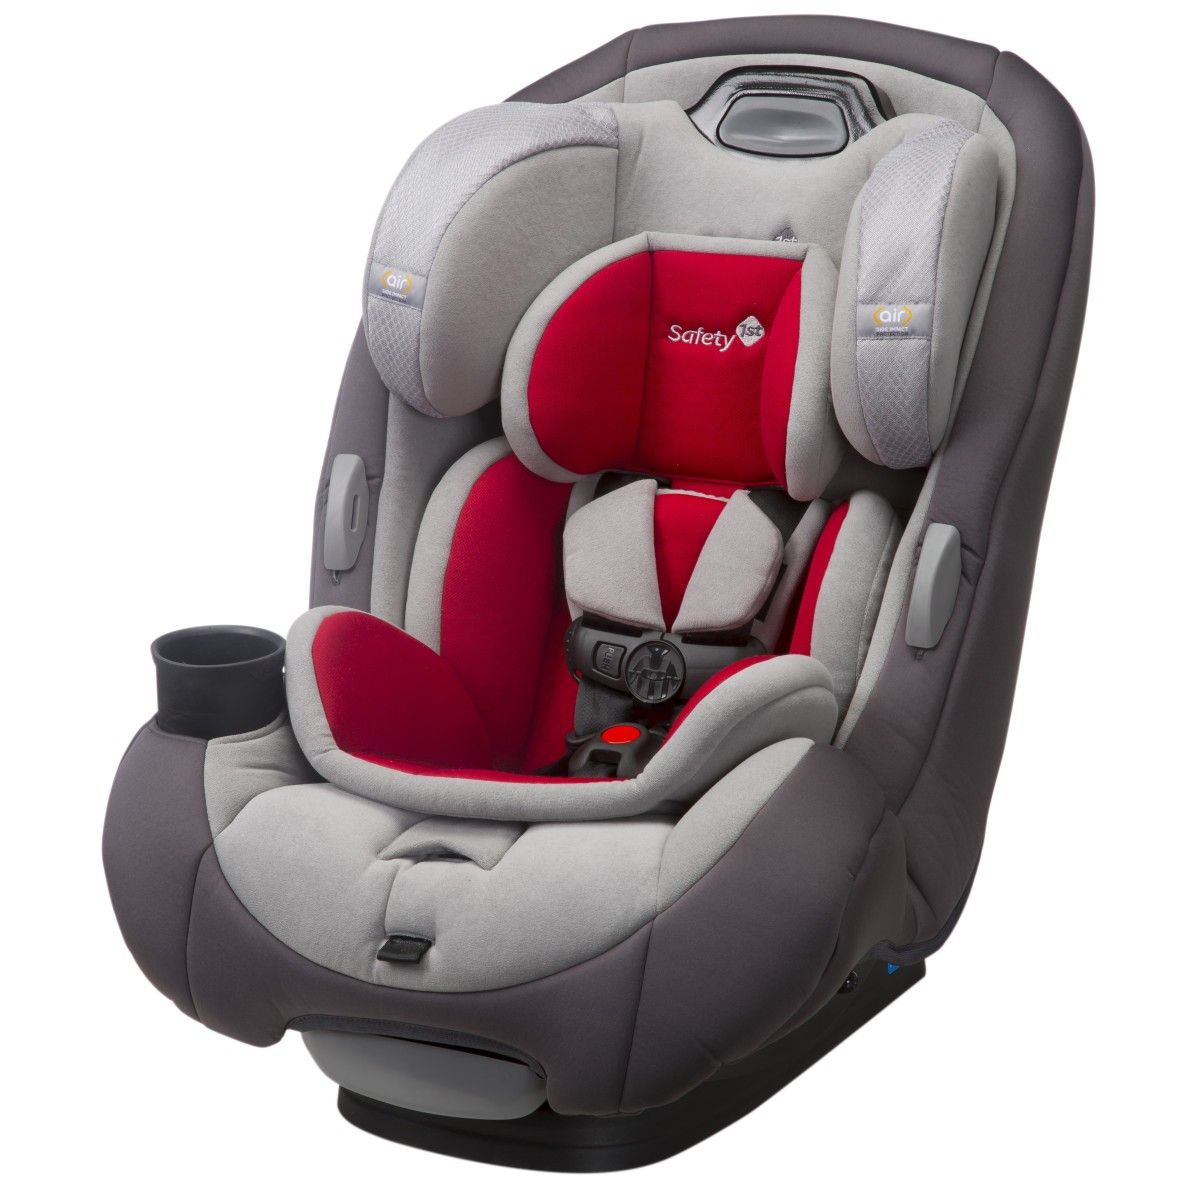 Growing with Safety: The Benefits of Convertible Car Seats for Toddlers